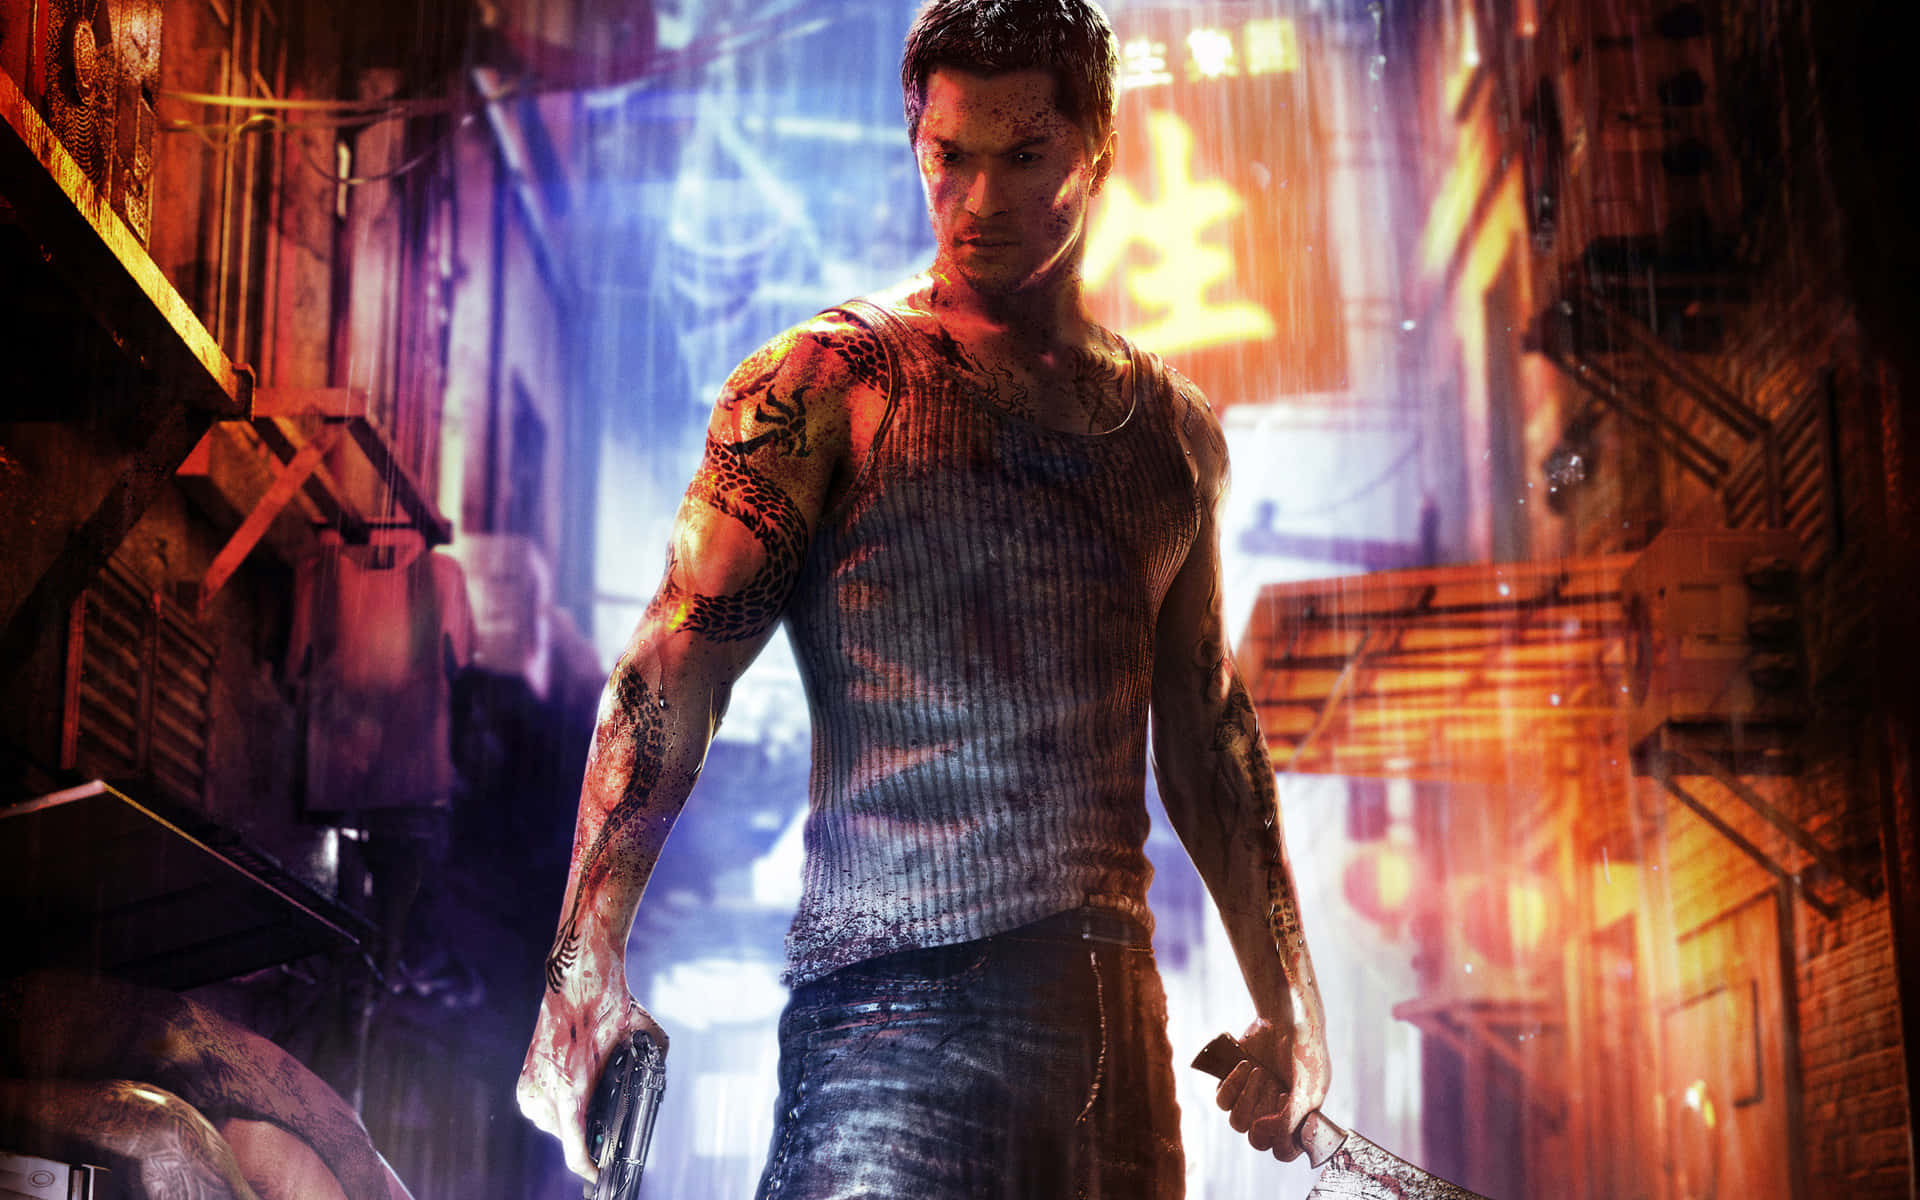 Protect the People You Love in "Sleeping Dogs"